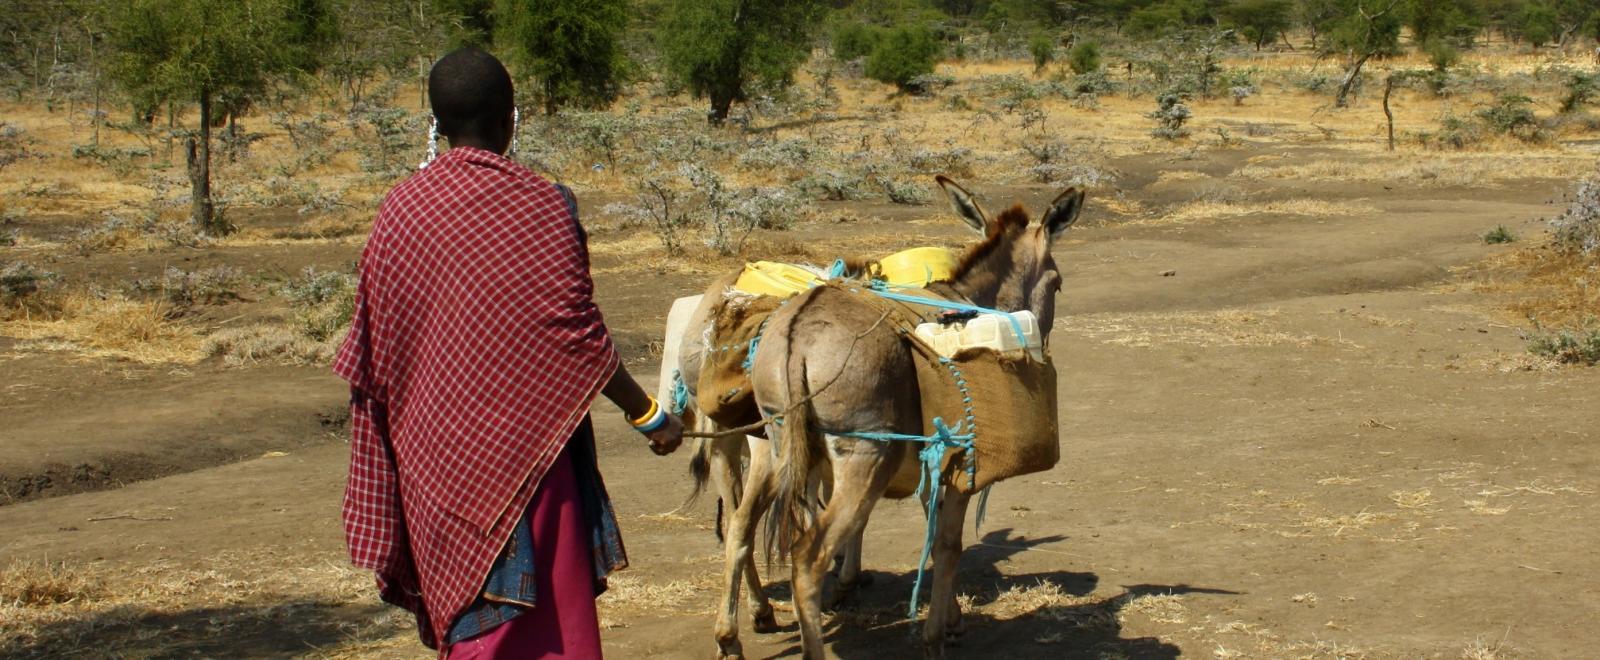 A Maasai herder cares for cattle at a village where volunteers participate in cultural immersion programmes in Tanzania.